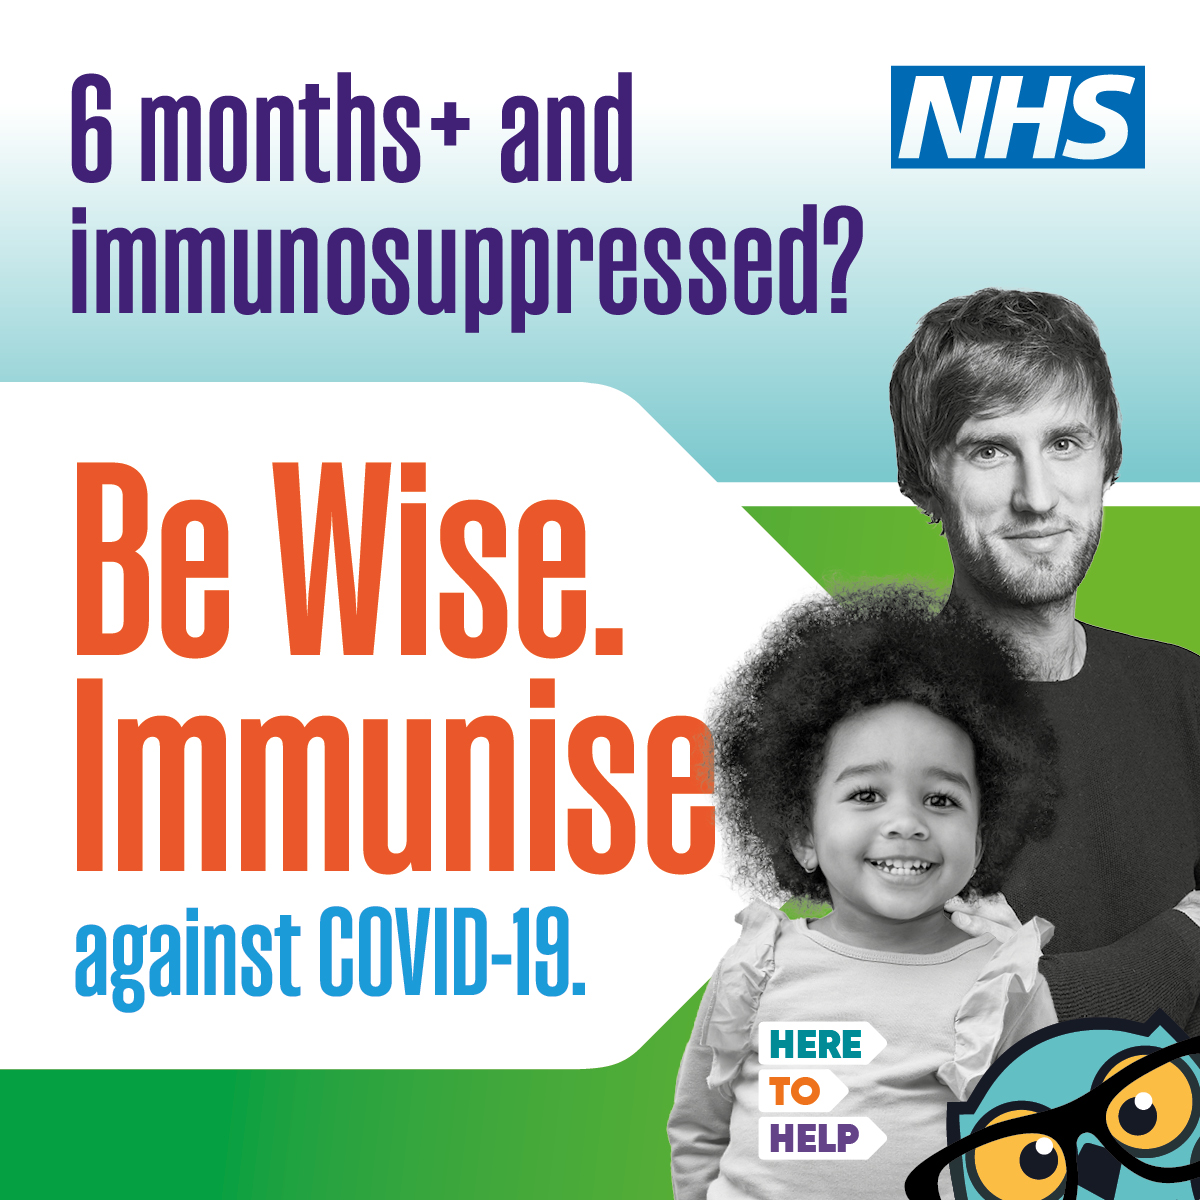 If you are immunosuppressed, your protection against Covid may fade more quickly.

It's important to protect yourself to prevent against any further complications, severe illness and hospitalisation from the virus.

Speak to your GP for more details. #BeWiseImmunise